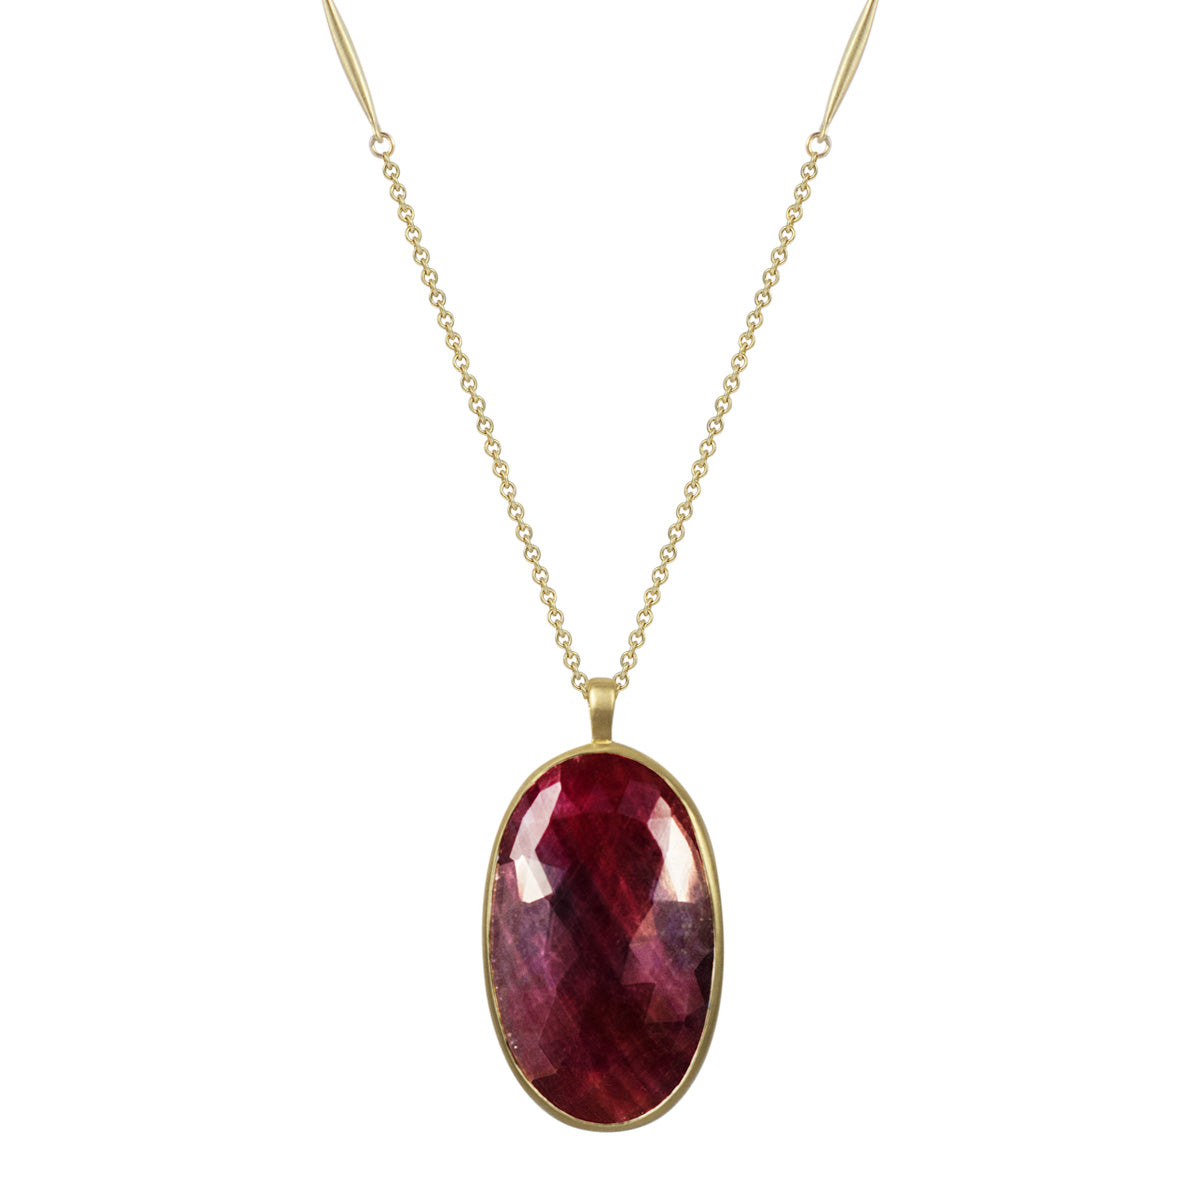 18K Gold 37.6 Carat Large Oval Ruby Pendant on Lure Chain - Me&Ro